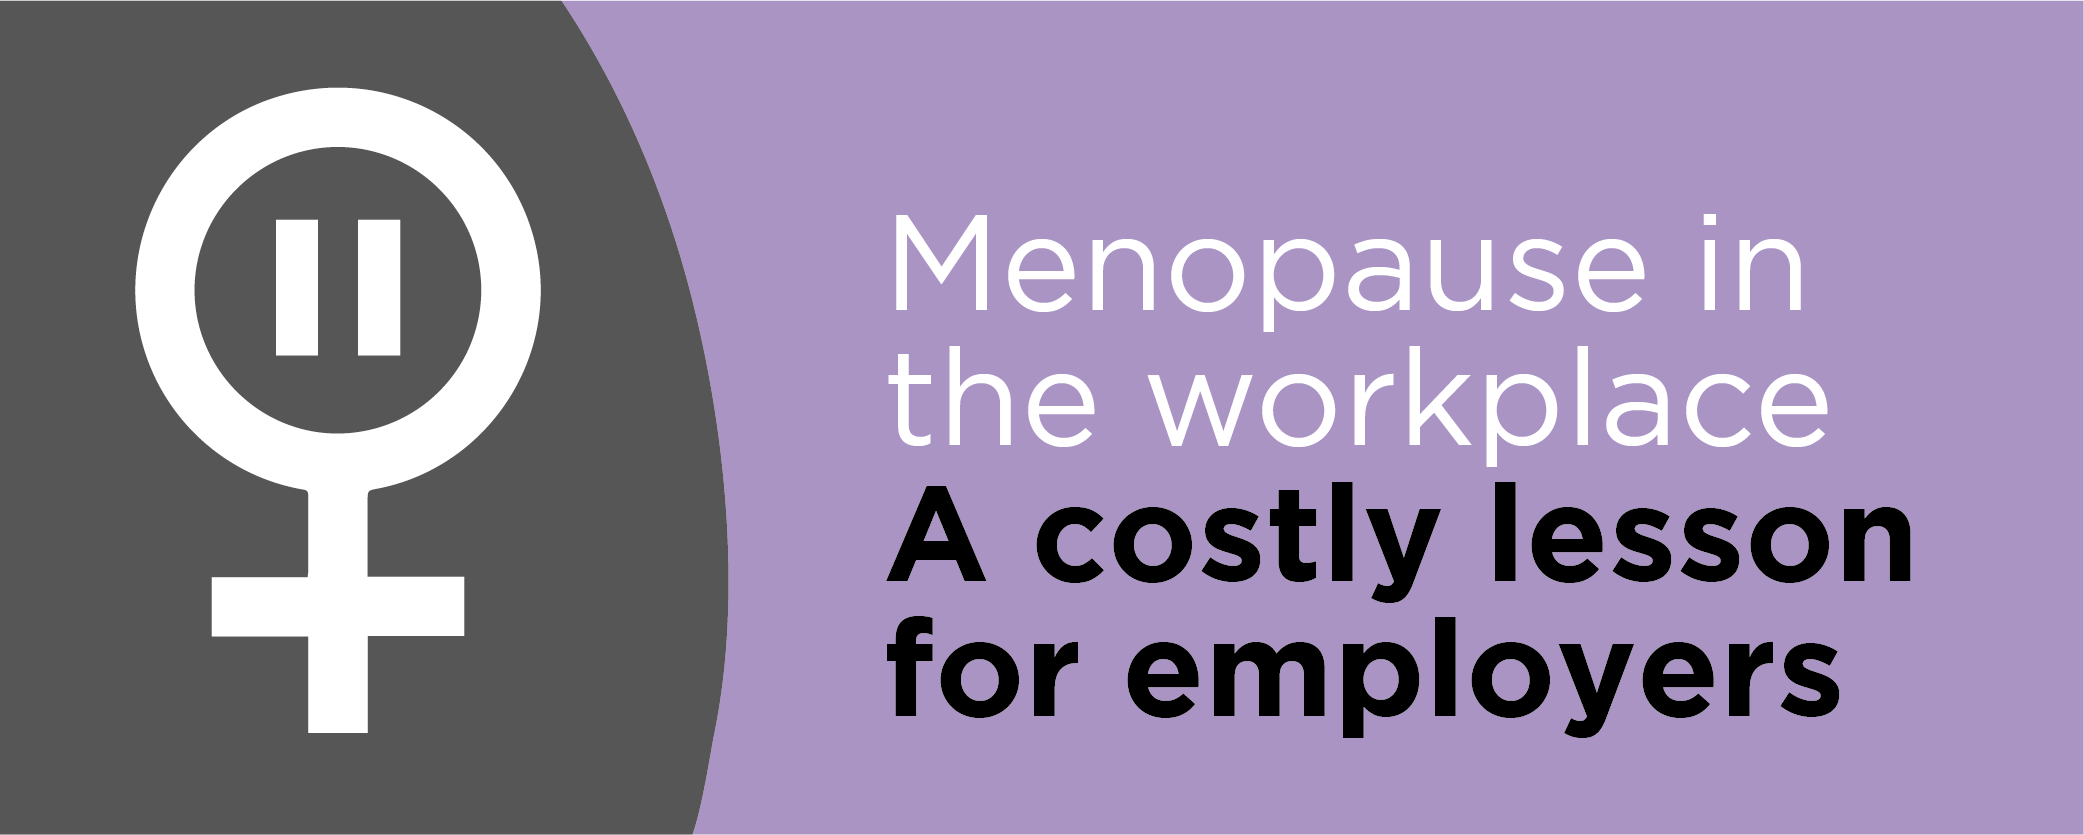 Menopause in the workplace: A costly lesson for employers